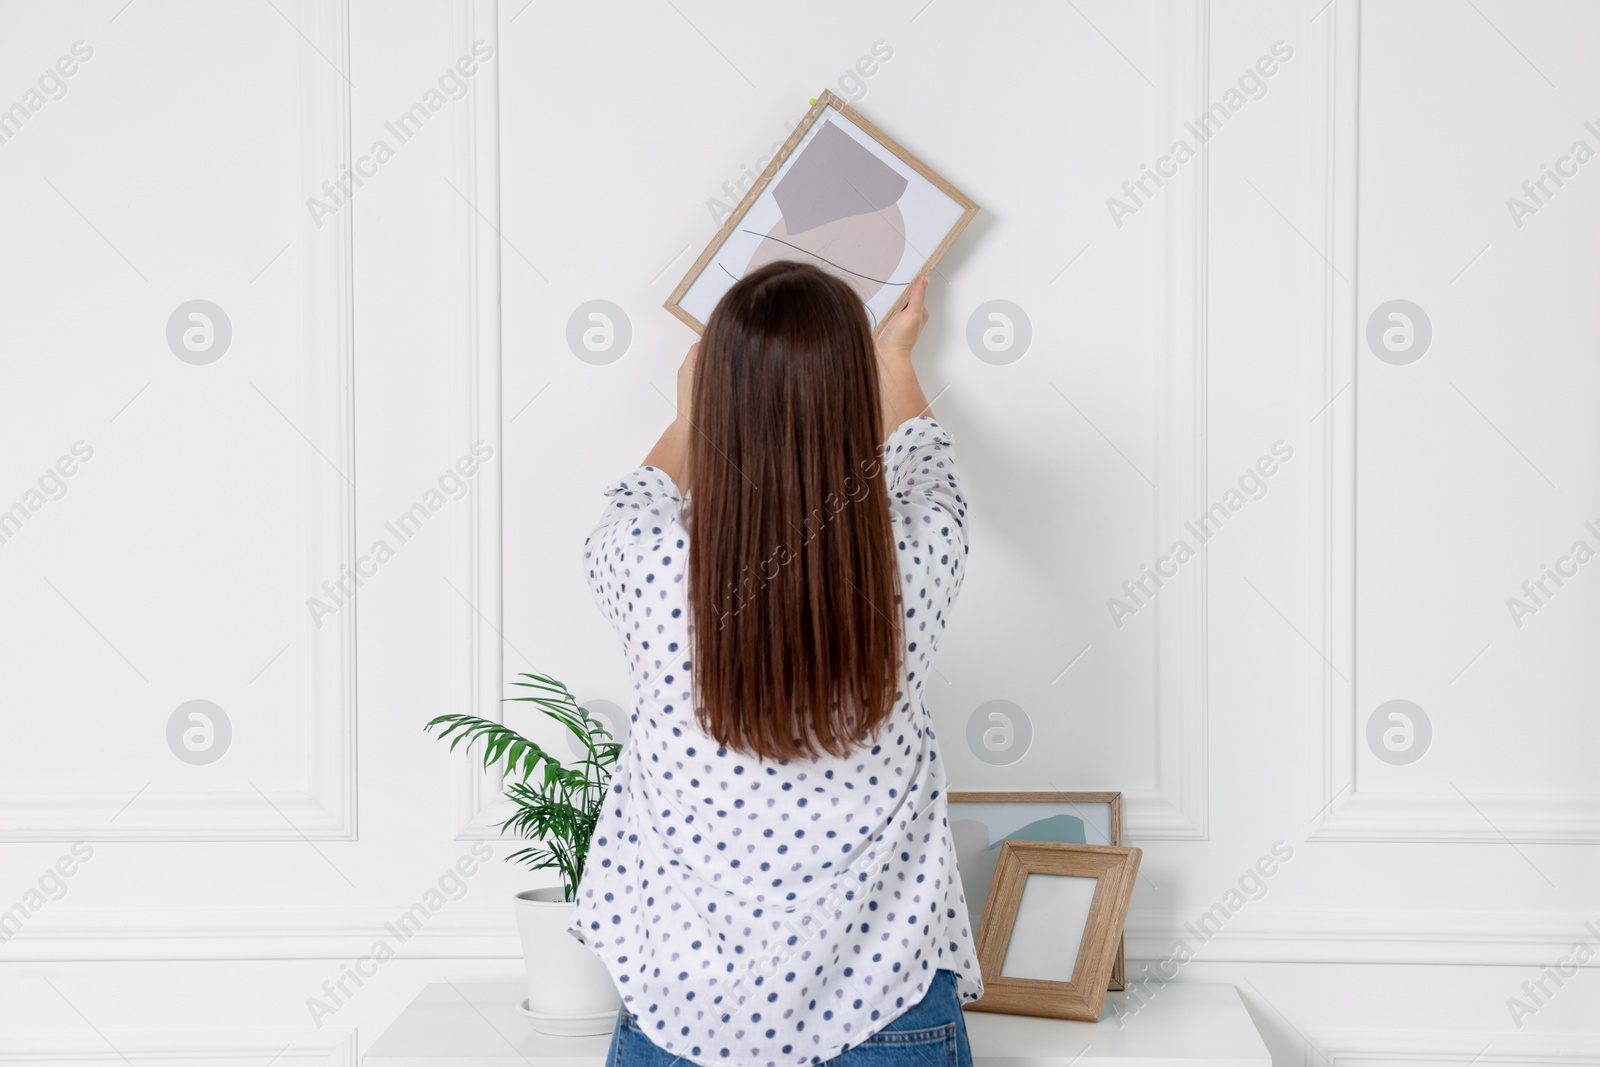 Photo of Woman hanging picture frame on white wall indoors, back view